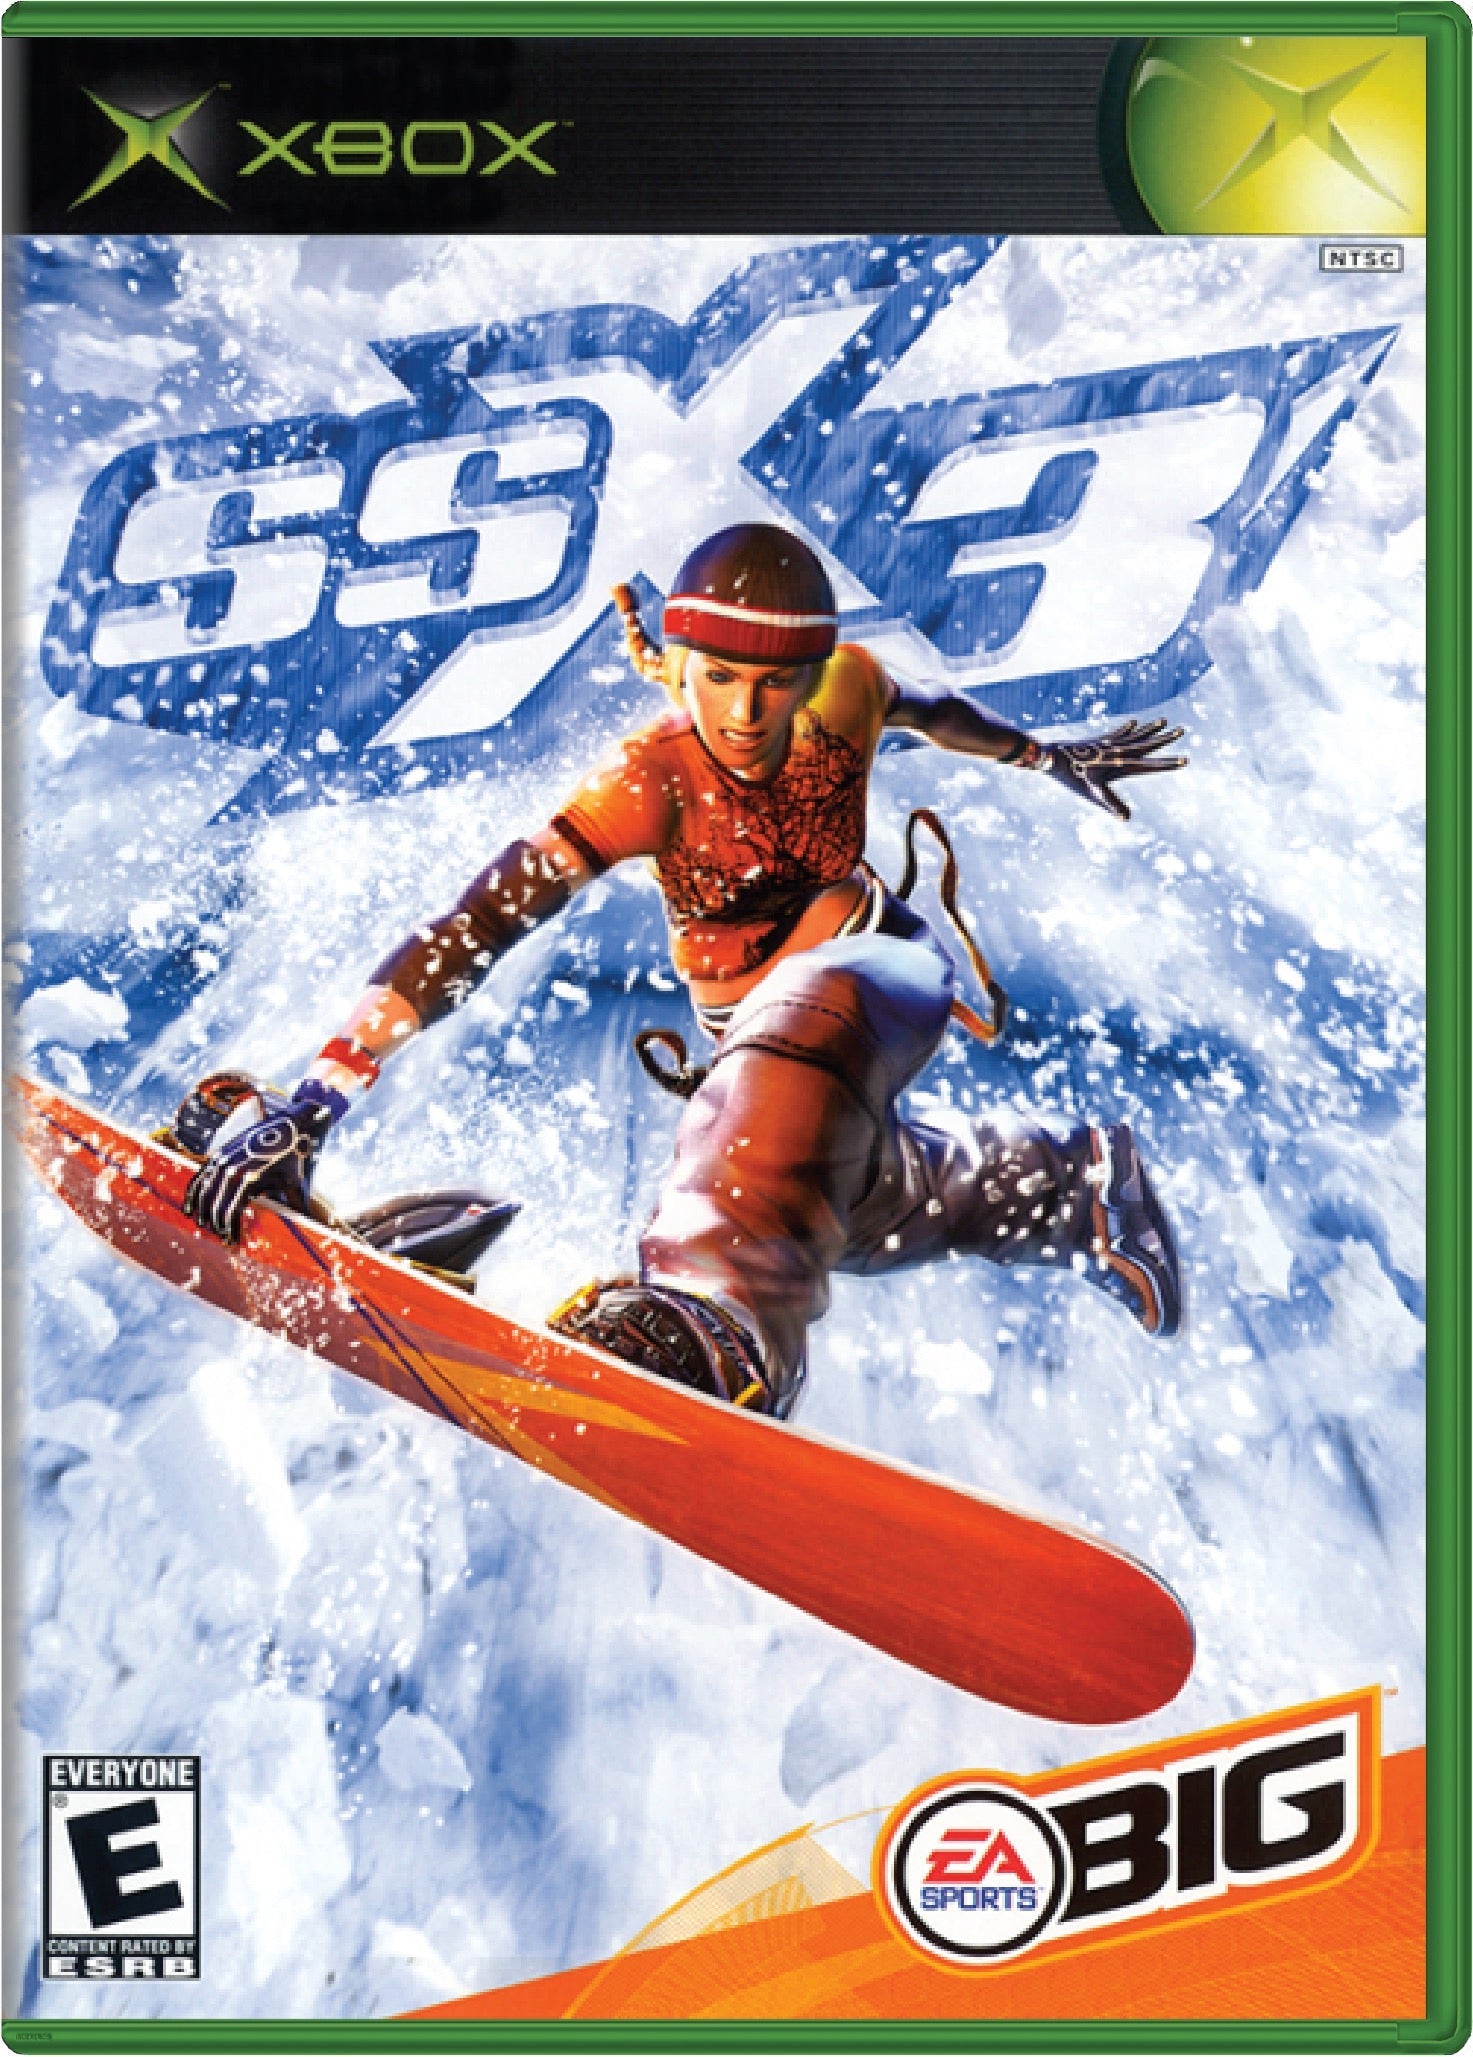 SSX 3 Cover Art